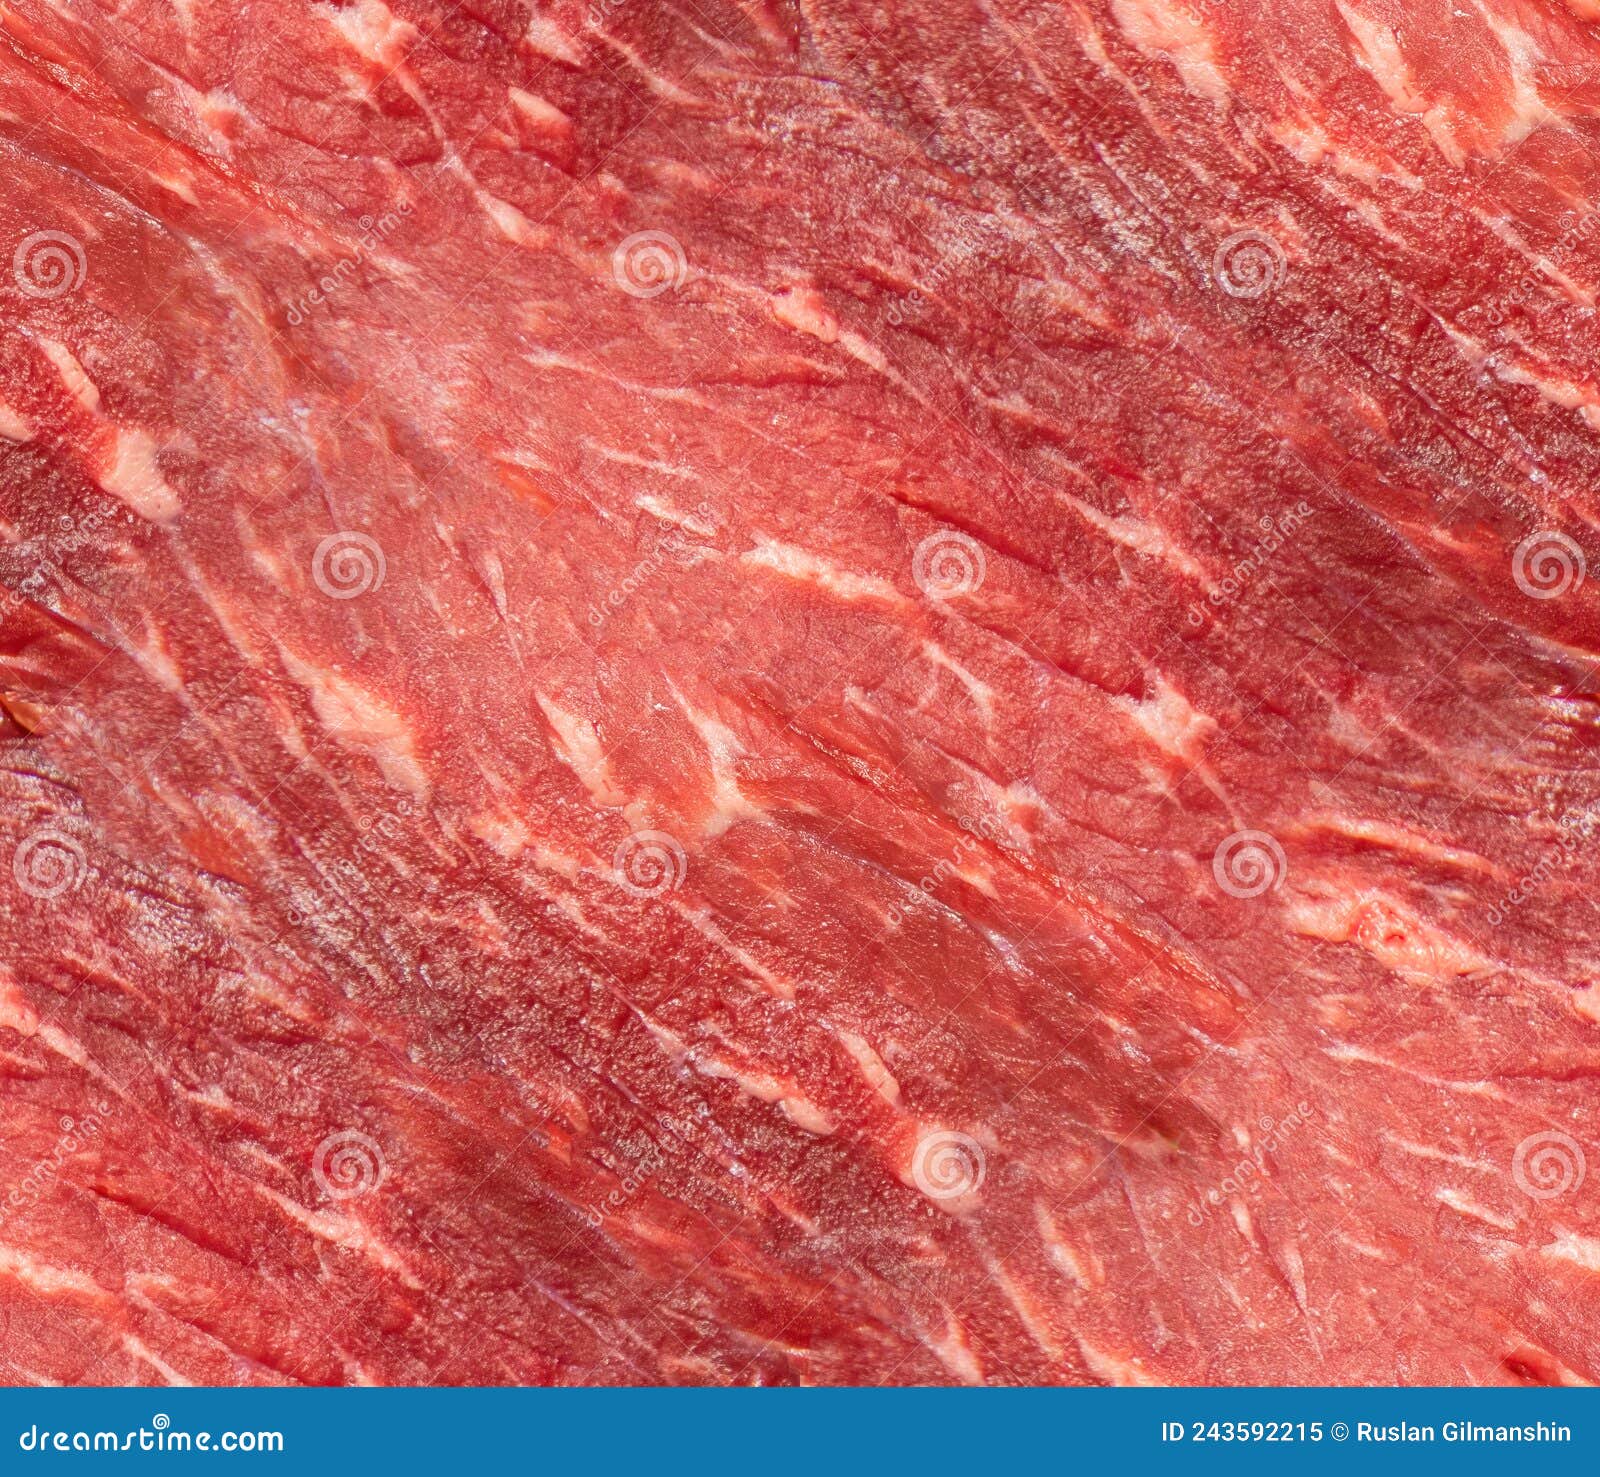 107 Beef Meat Raw Seamless Texture Stock Photos - Free & Royalty-Free Stock  Photos from Dreamstime